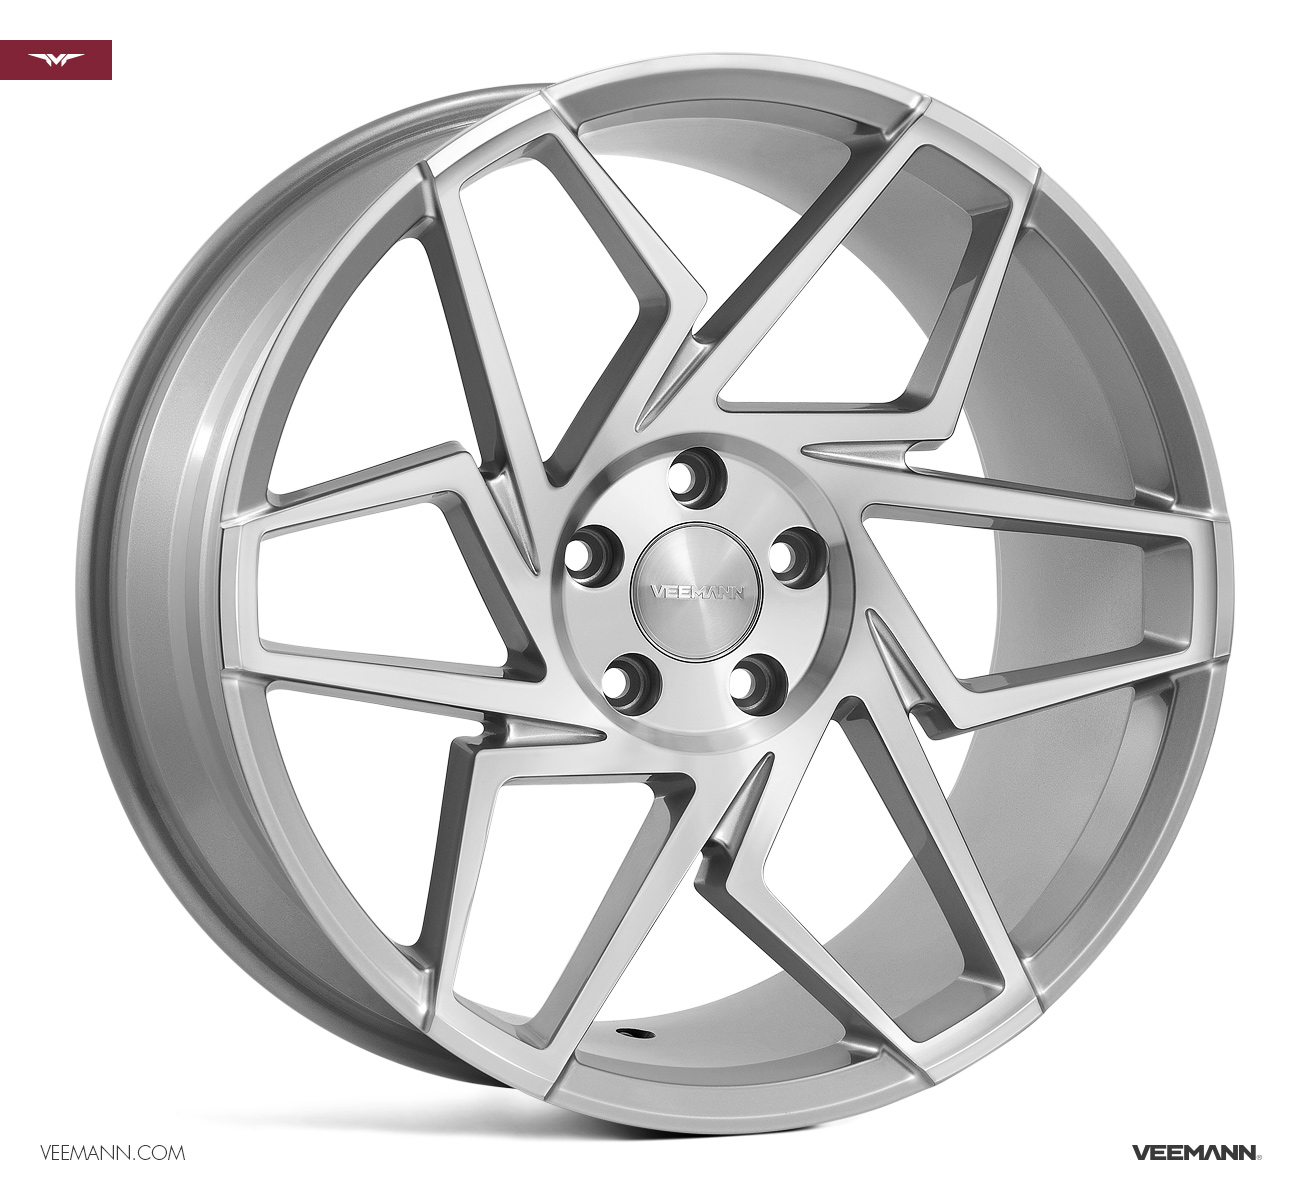 NEW 20" VEEMANN V-FS27R ALLOY WHEELS IN SILVER POL WITH WIDER 10" REARS